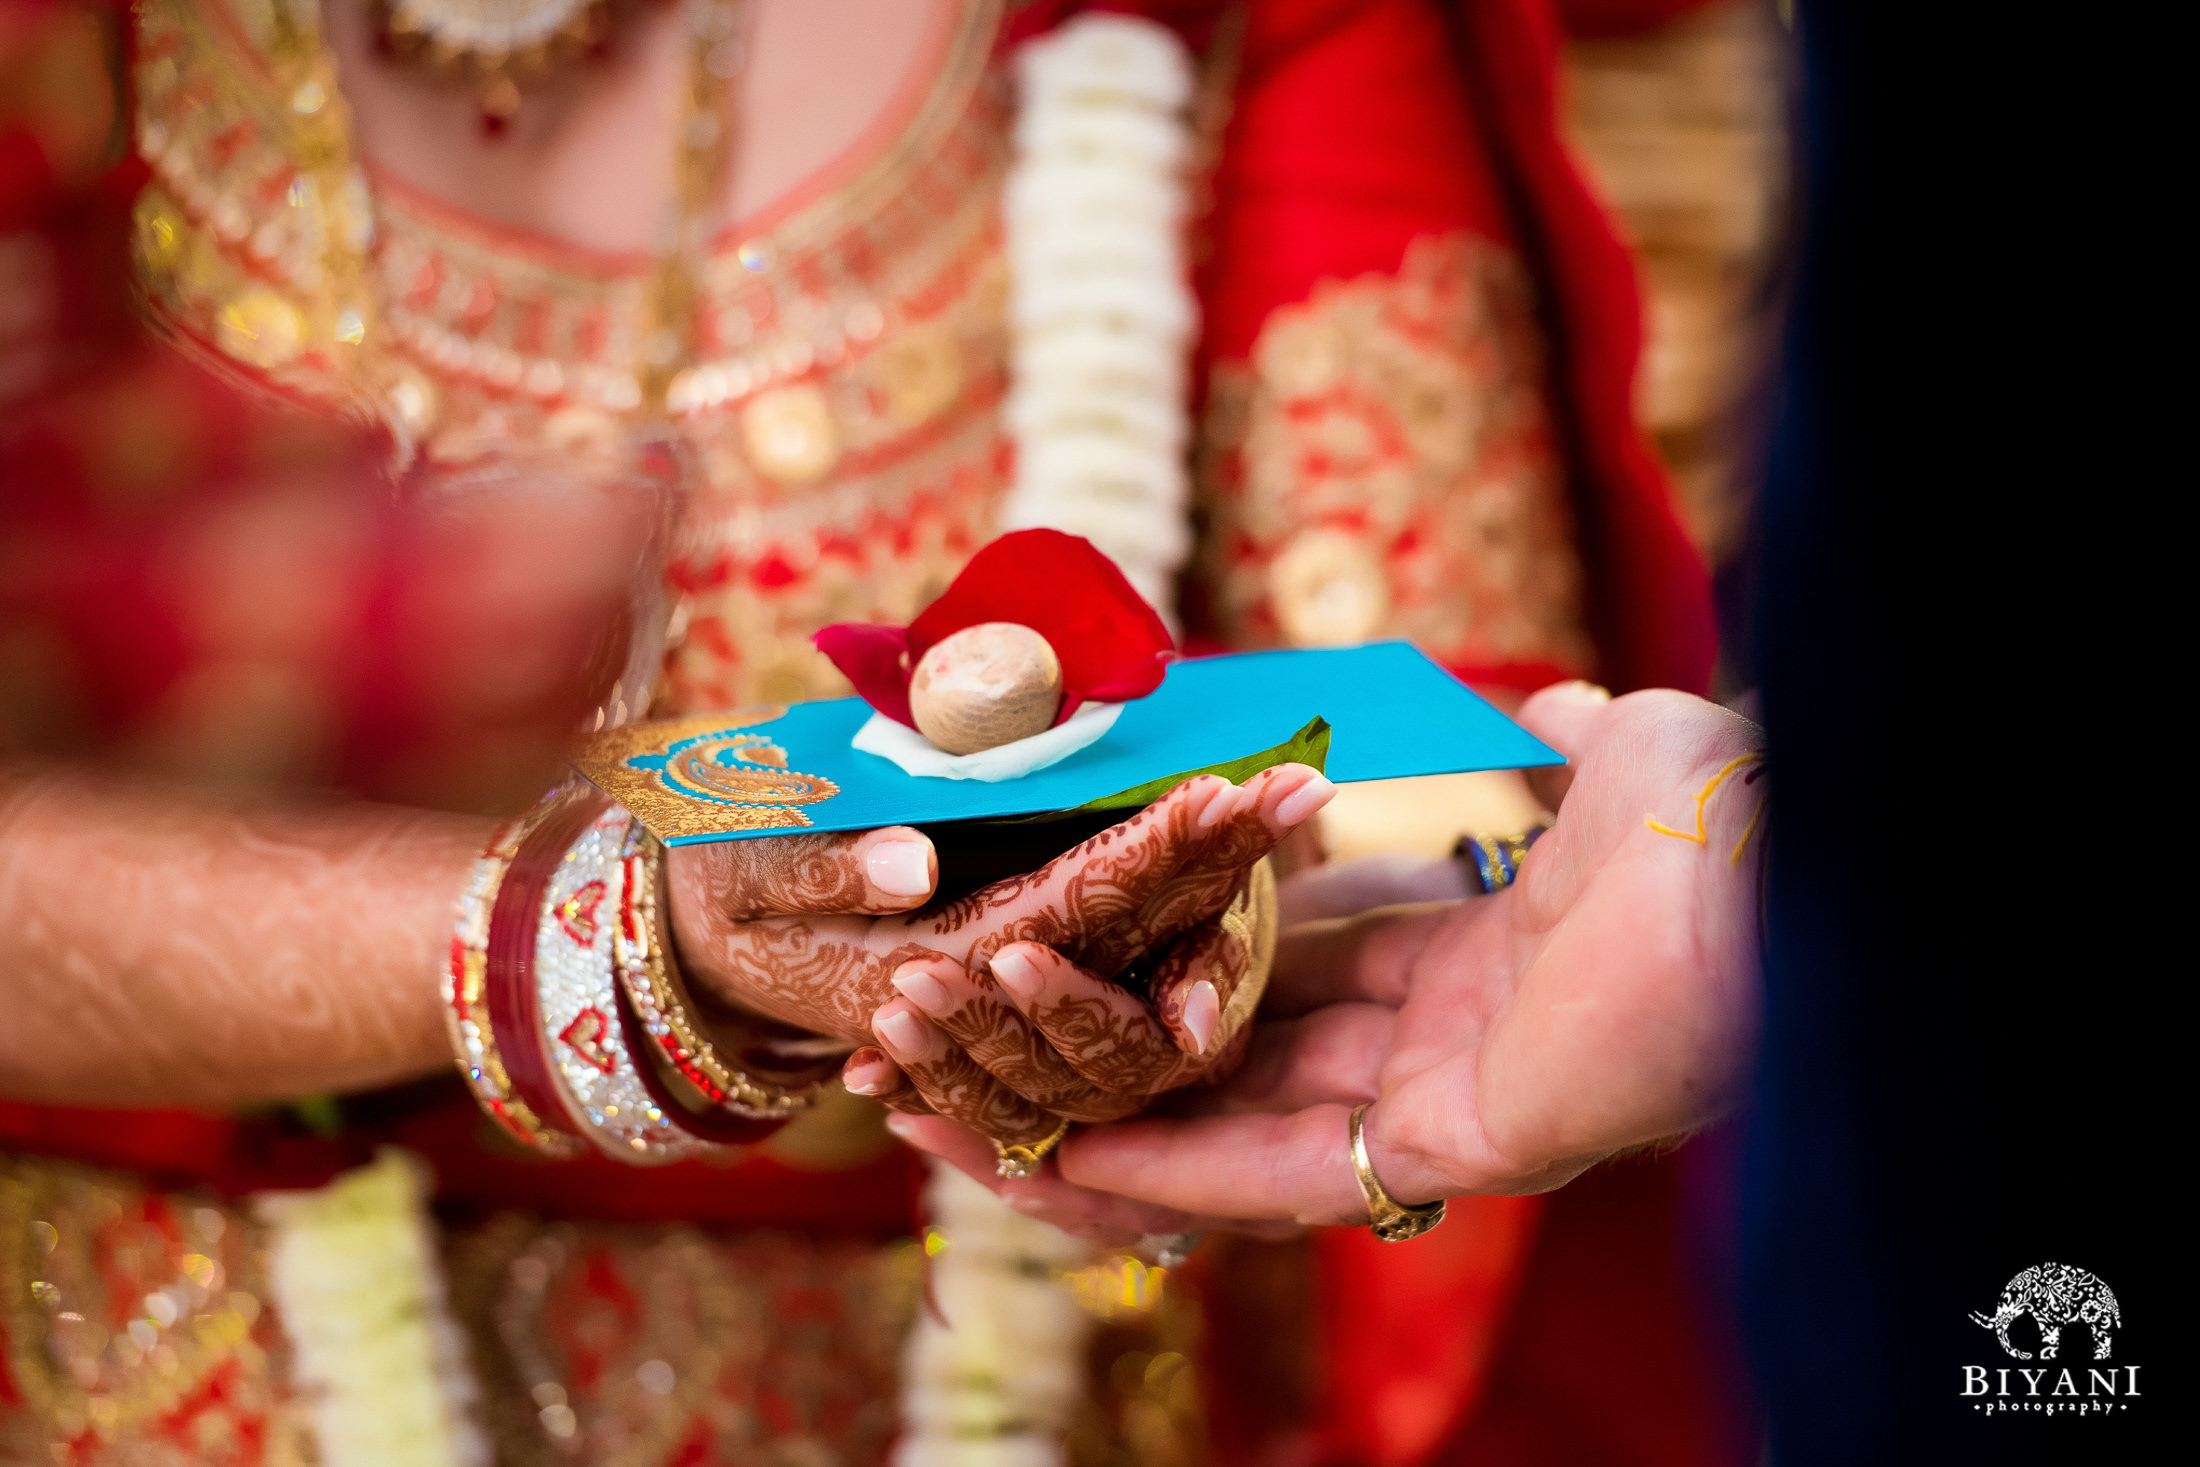 The bride offers gifts during Indian ceremony